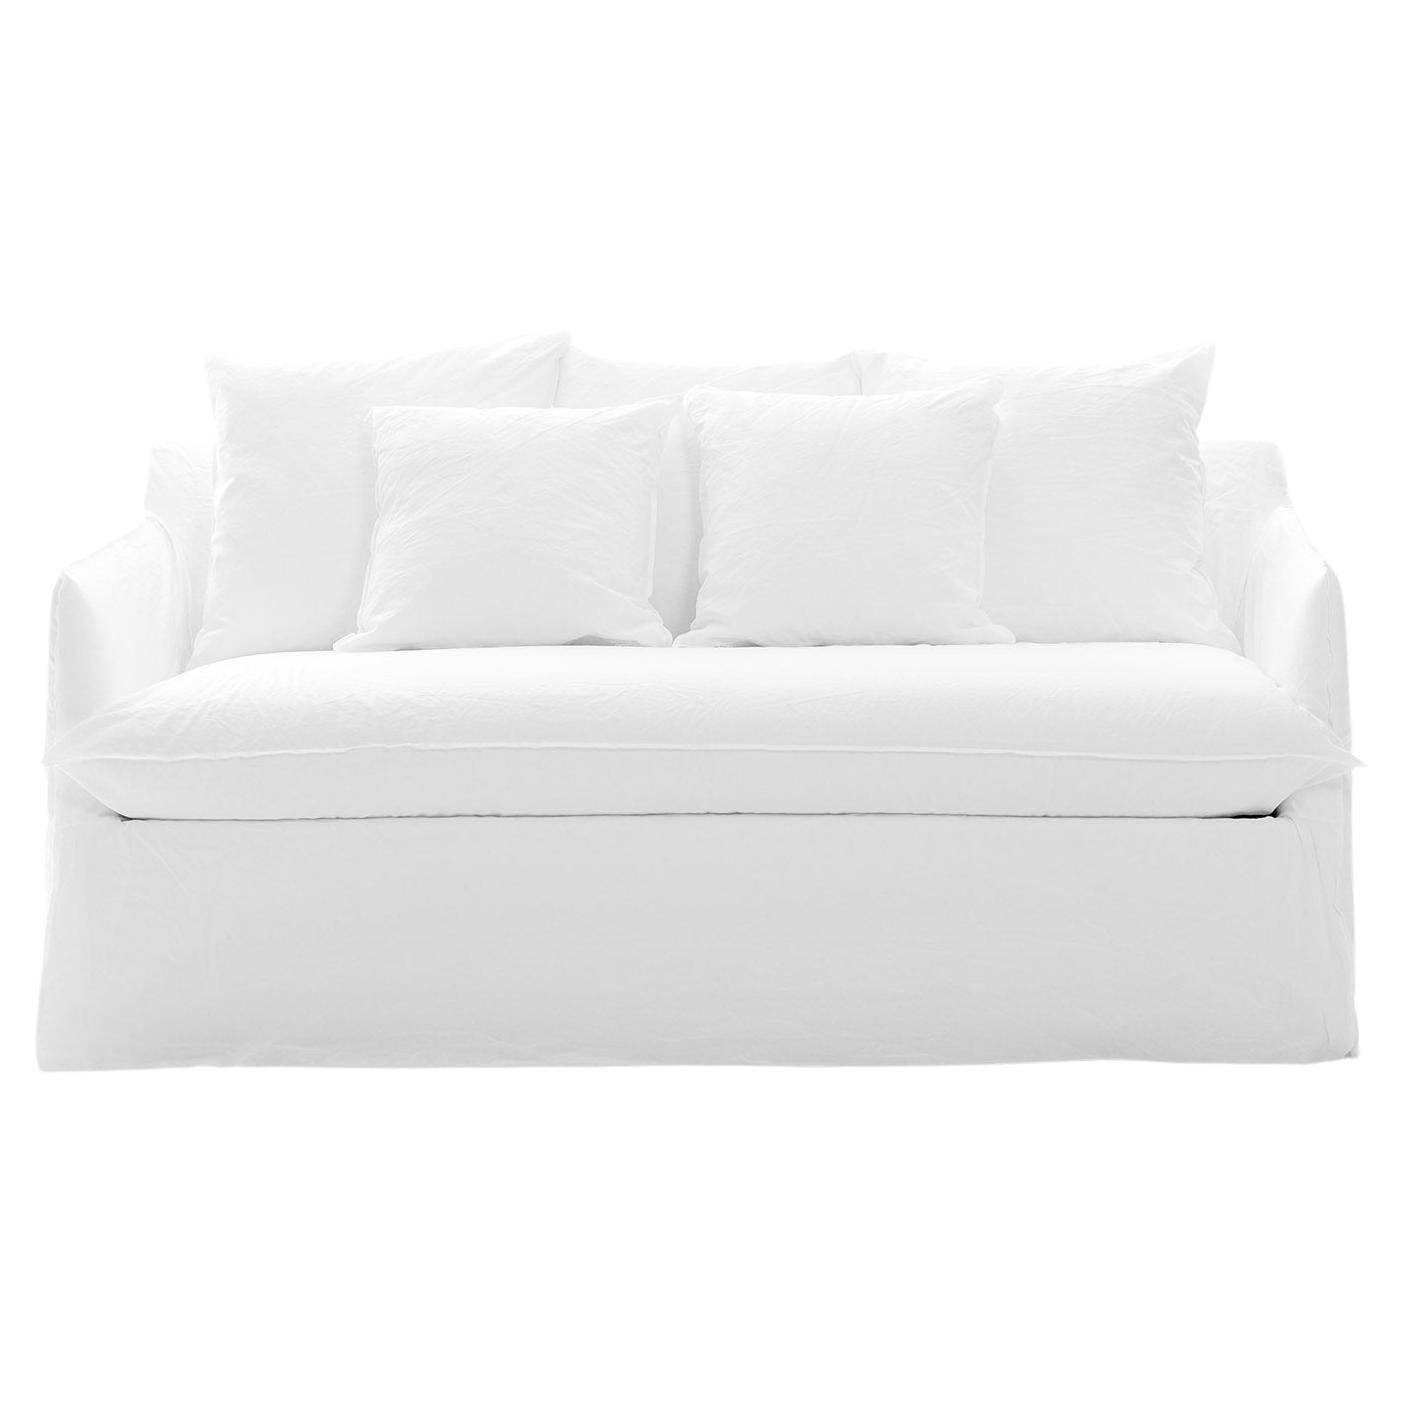 Gervasoni Ghost 13 Sofa Bed in White Linen Upholstery by Paola Navone For Sale